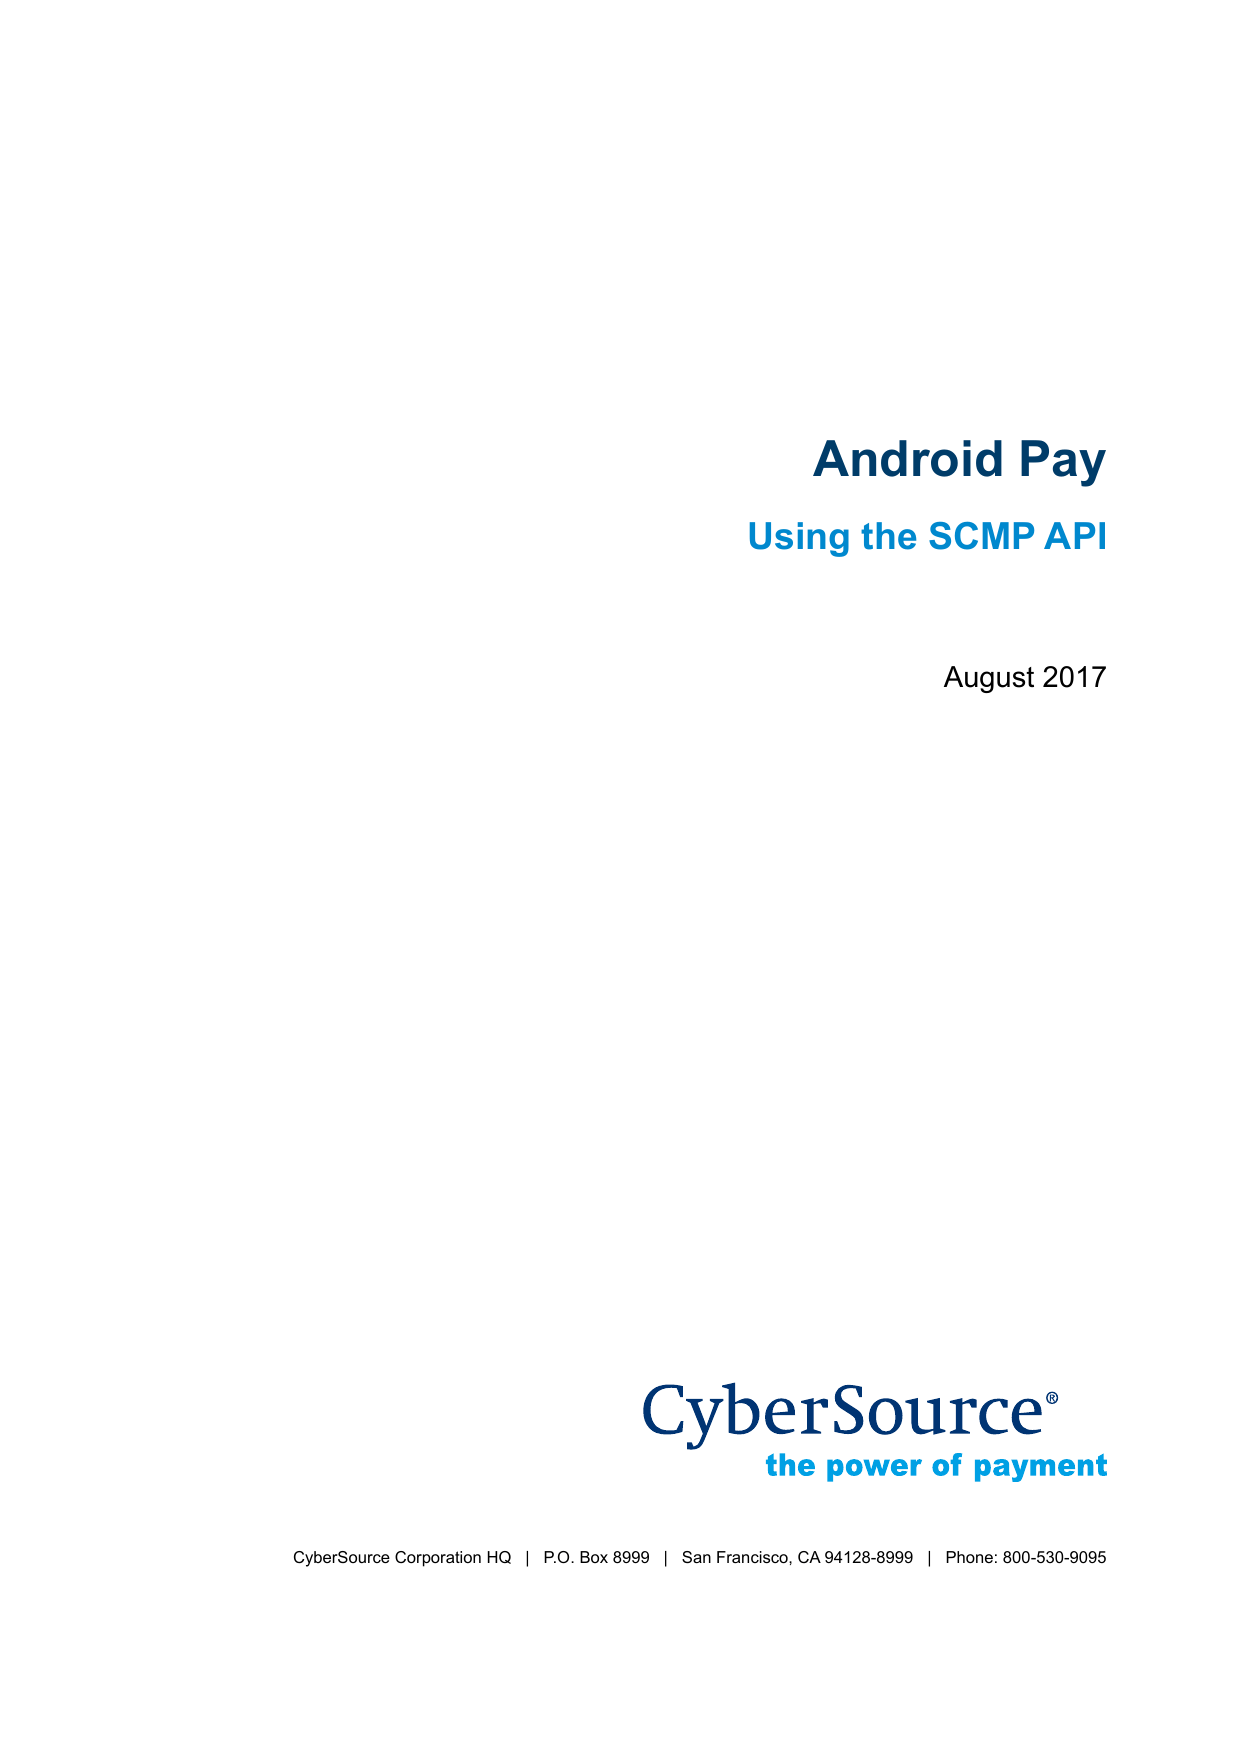 CyberSource Logo - Android Pay